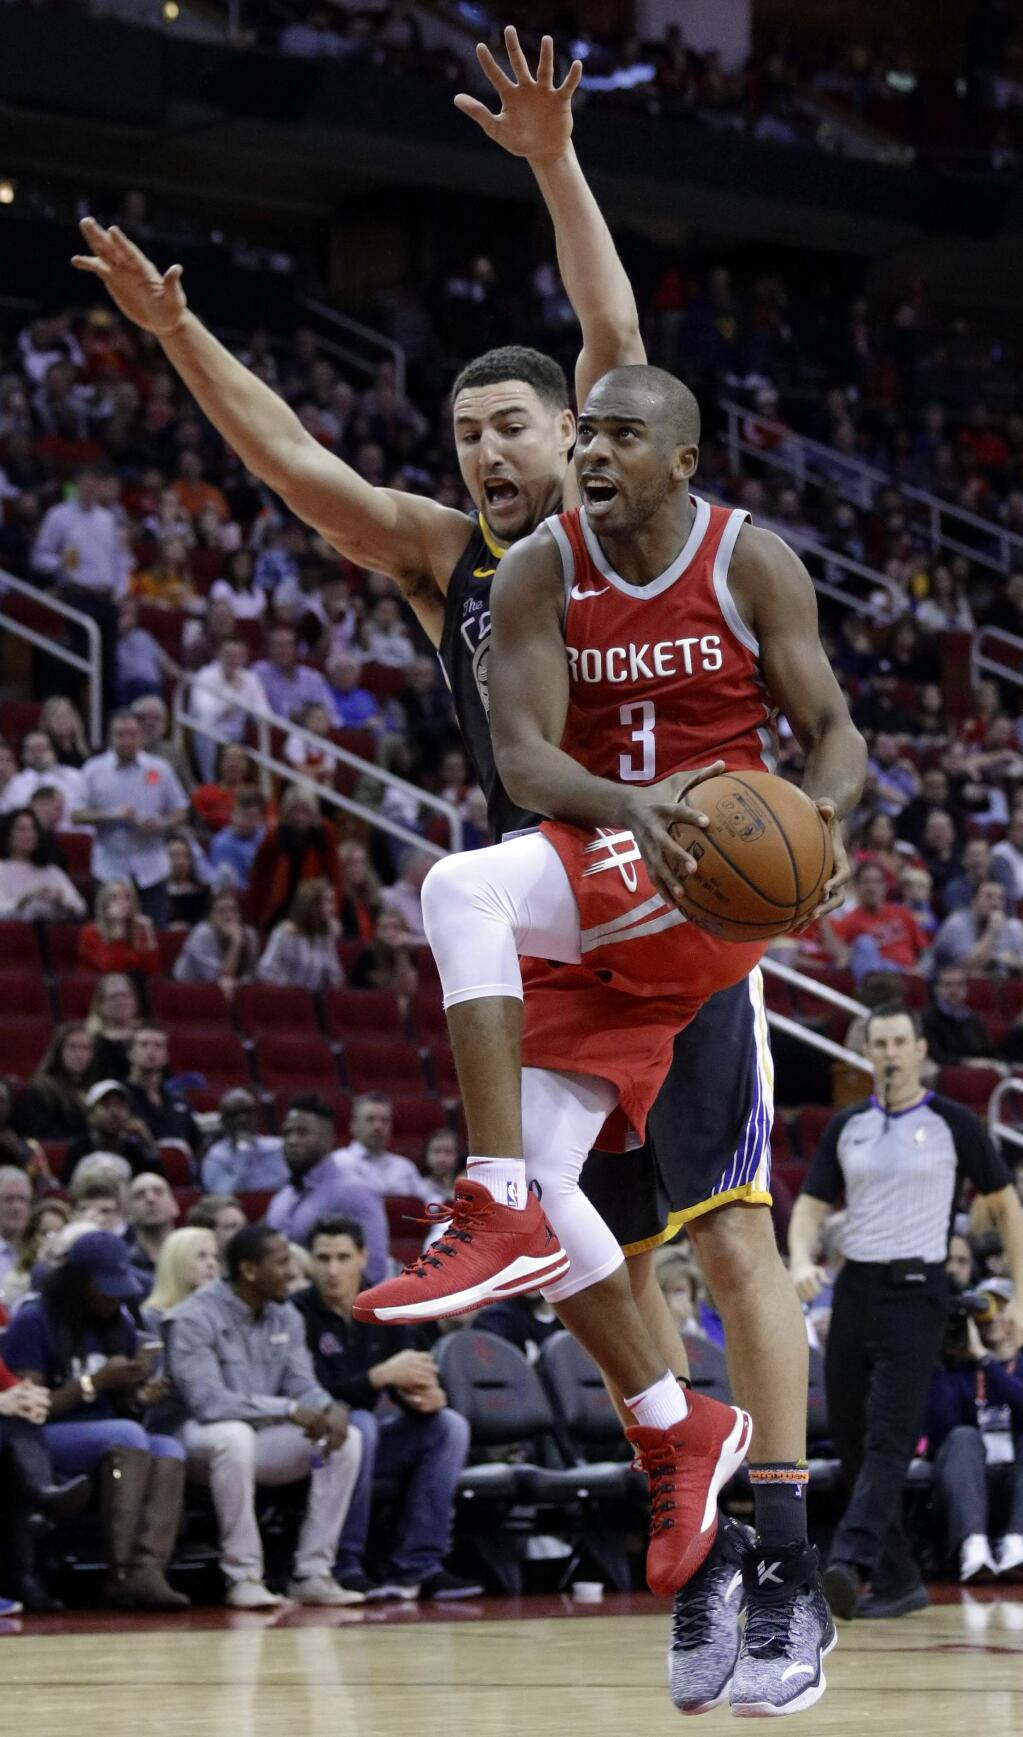 FILE - In this Jan. 20, 2018, file photo, Houston Rockets guard Chris Paul (3) shoots in front of Golden State Warriors guard Klay Thompson (11) during the second half of an NBA basketball game, in Houston. The buildup to this Golden State-Houston matchup in the Western Conference finals started in February, when Draymond Green had some pointed comments. Or in October, when the Rockets beat the Warriors on ring night. Or in June, when Chris Paul got traded. Whatever the case, the series that everyone in the NBA apparently wanted to see is about to happen. (AP Photo/Michael Wyke, File)